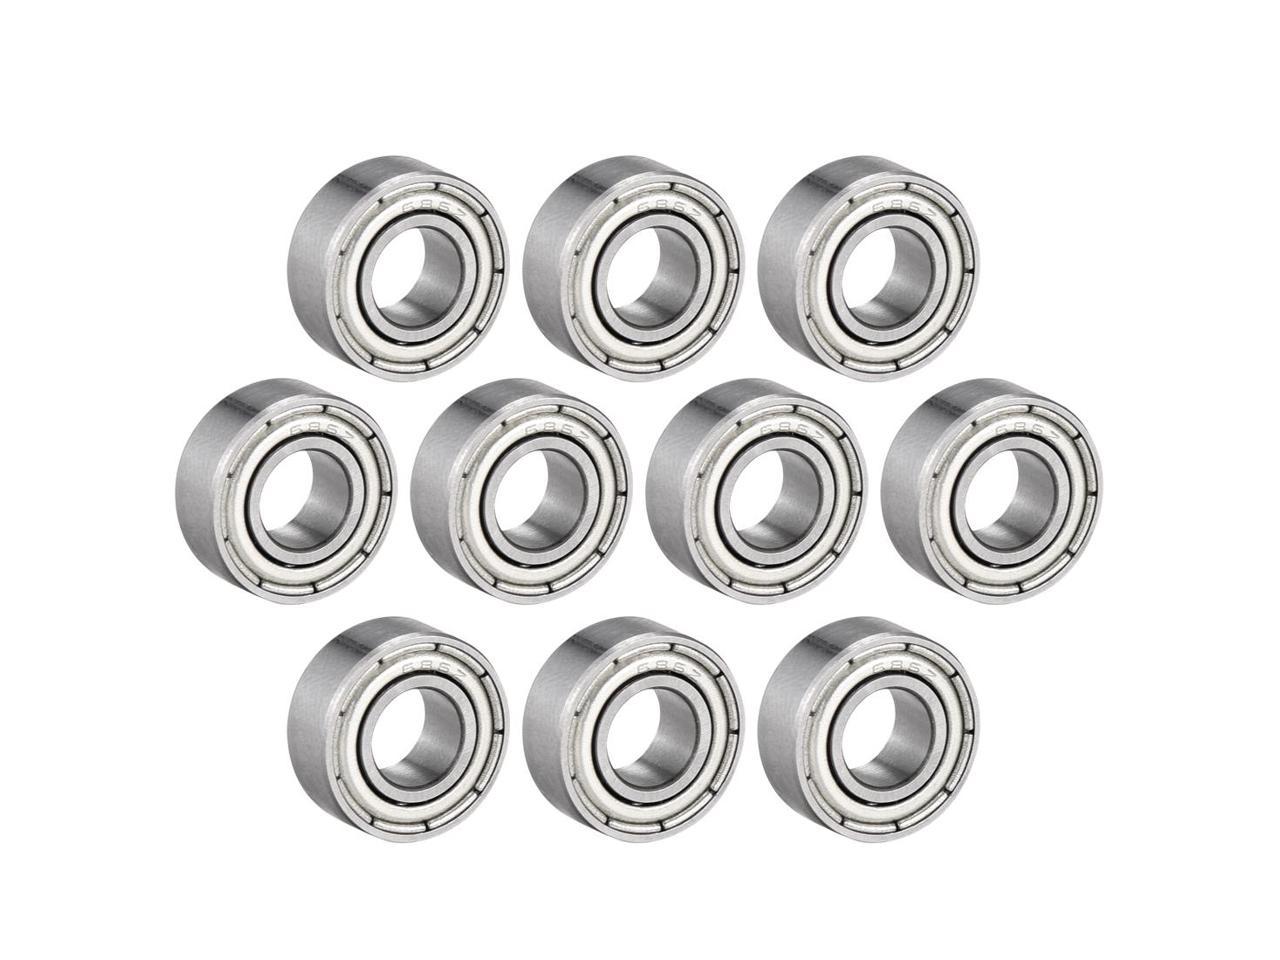 SF696ZZ STAINLESS FLANGED MINATURE BALL BEARING SHIELDED 6MM X 15MM X 5MM 